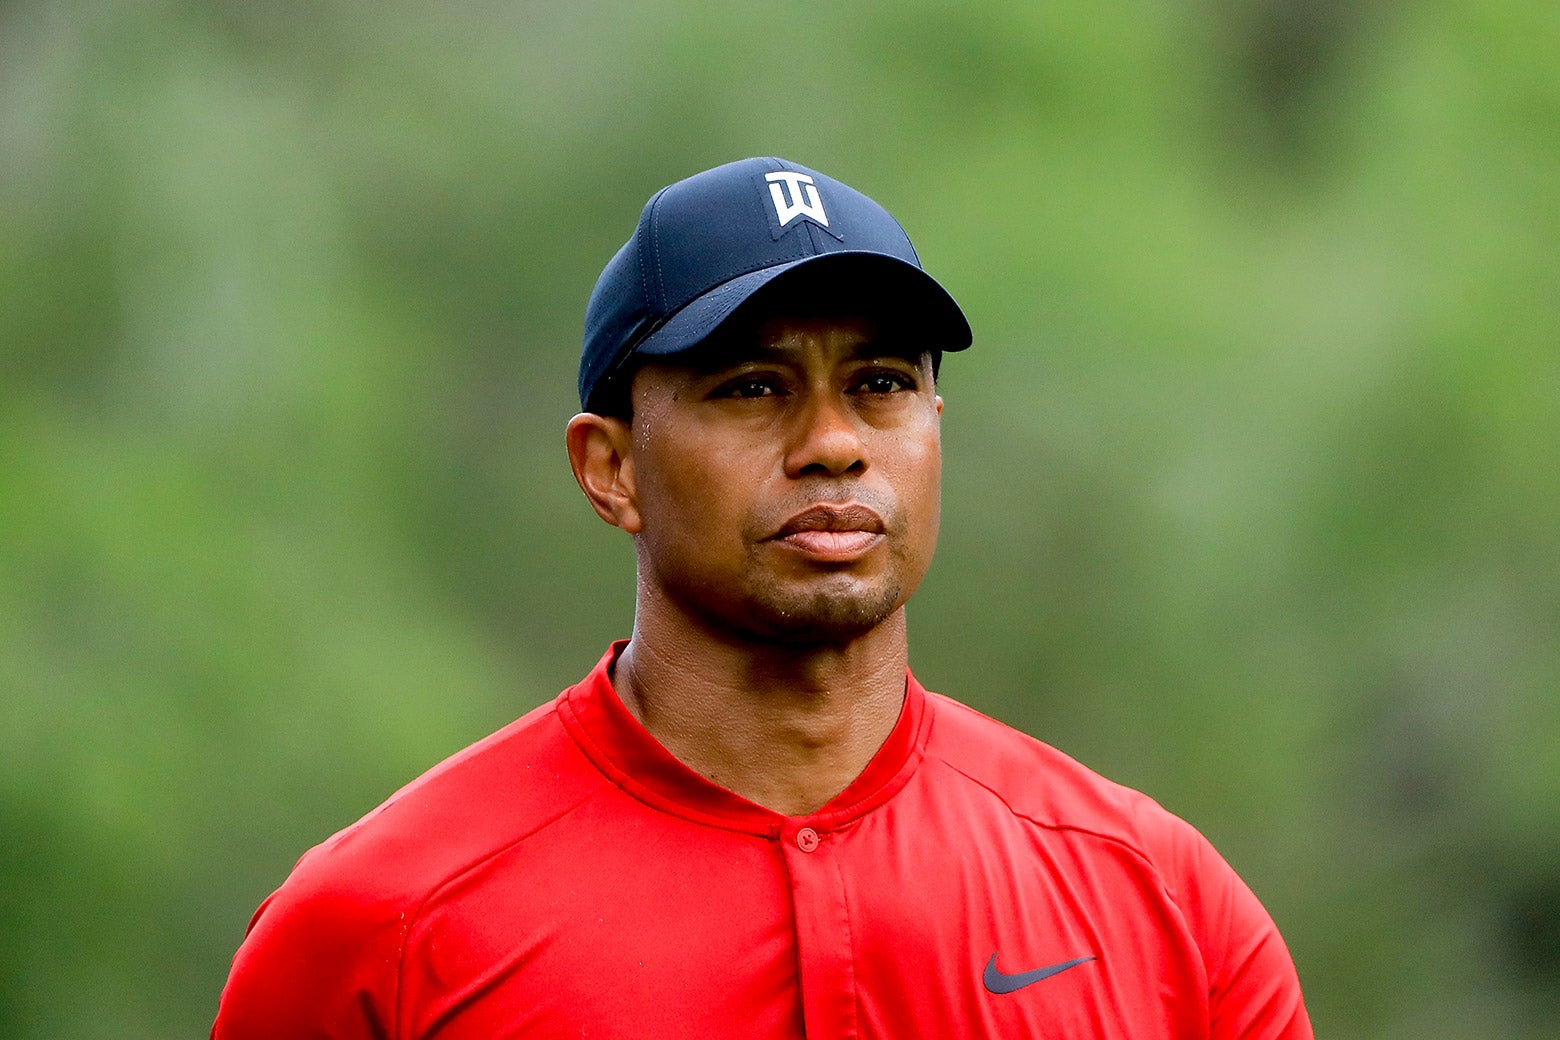 Tiger Woods looks on on the 14th hole during the final round of the Valspar Championship at Innisbrook Resort Copperhead Course on March 11 in Palm Harbor, Florida.